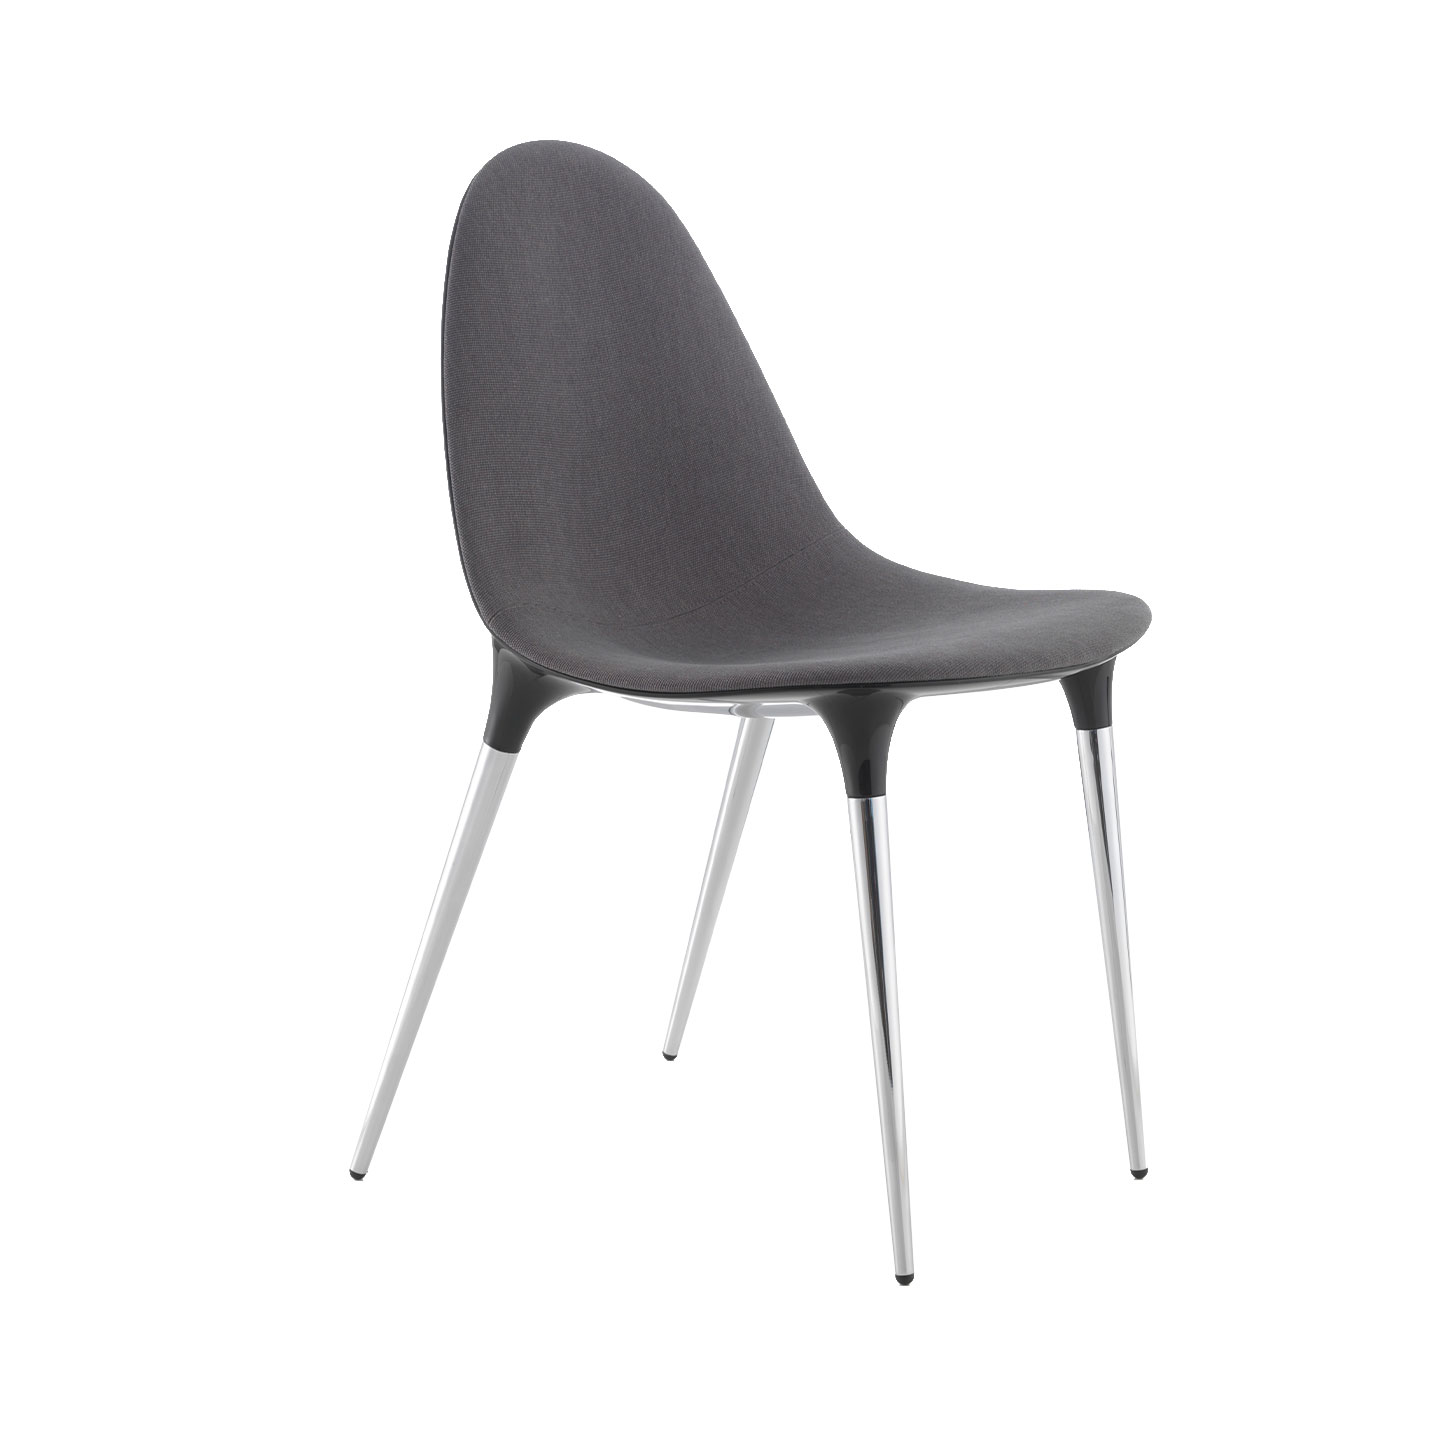 Haworth Caprice chair in grey color with metal legs